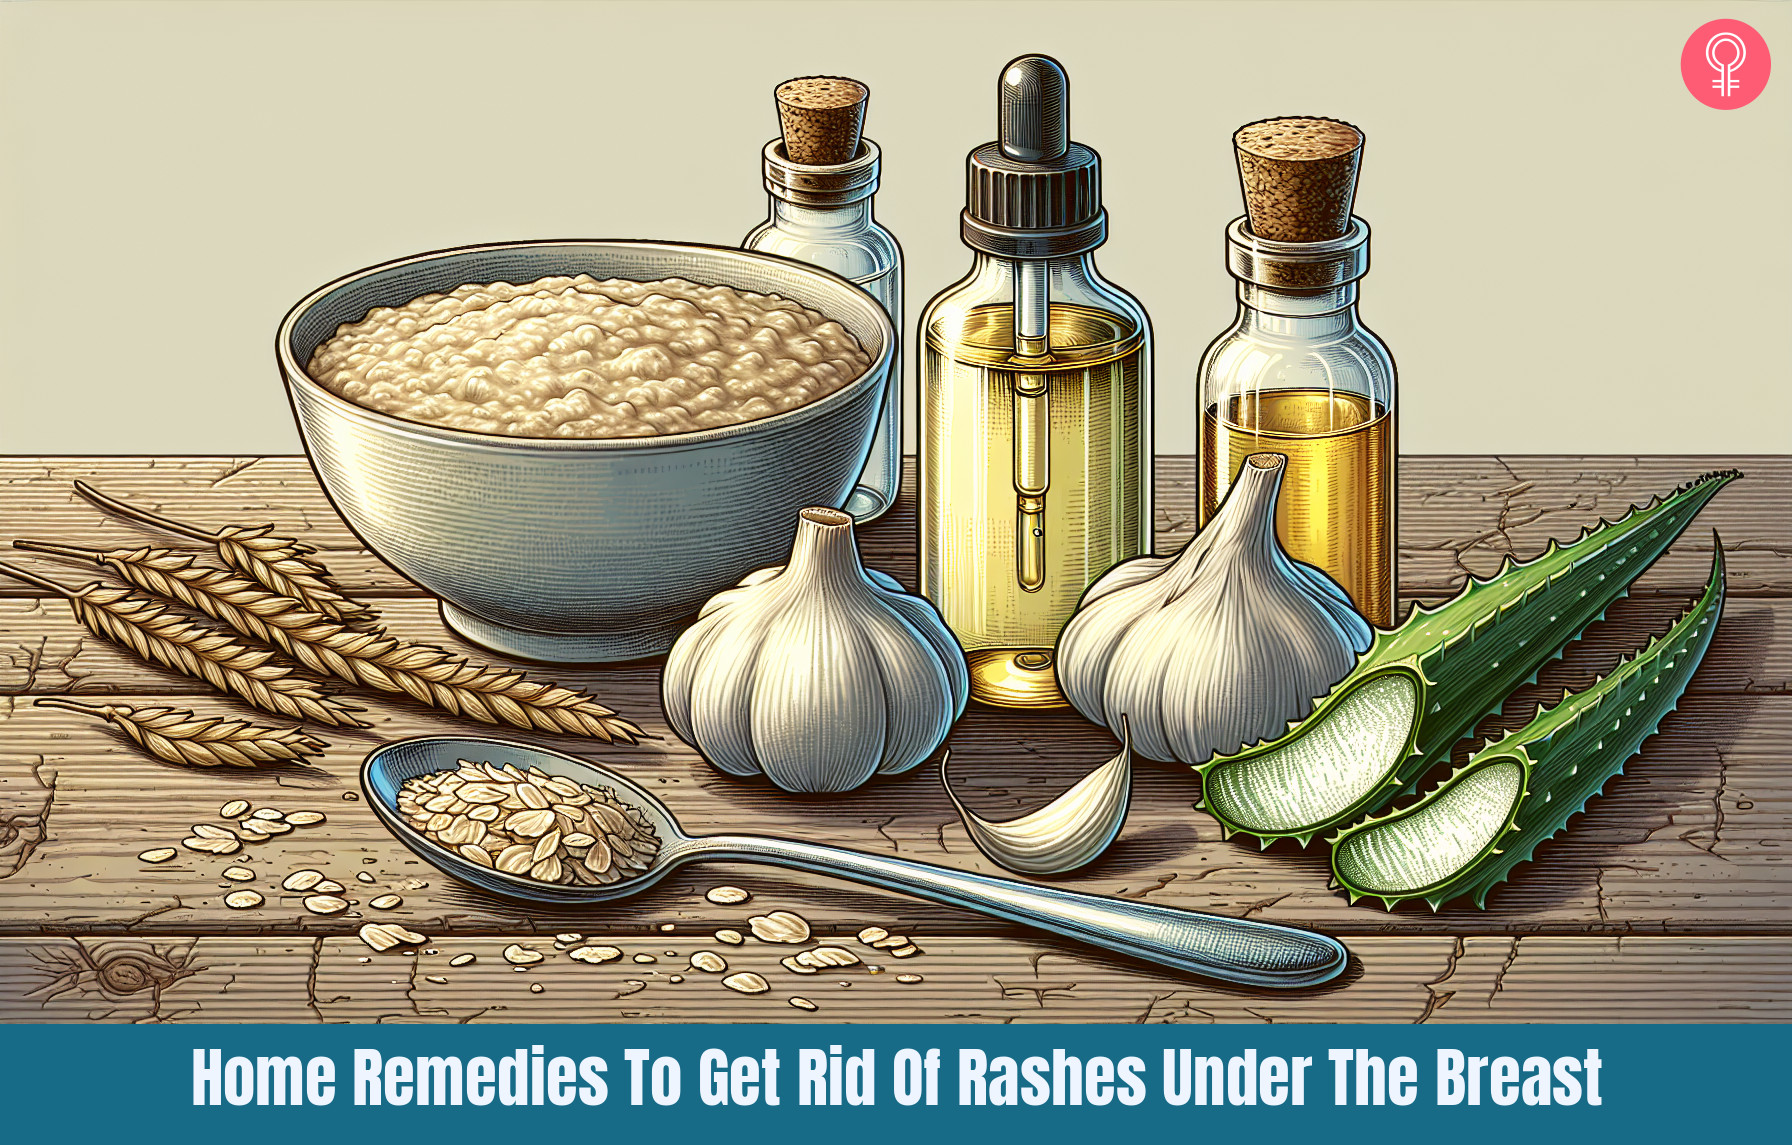 11 Home Remedies To Get Rid Of Rashes Under The Breast